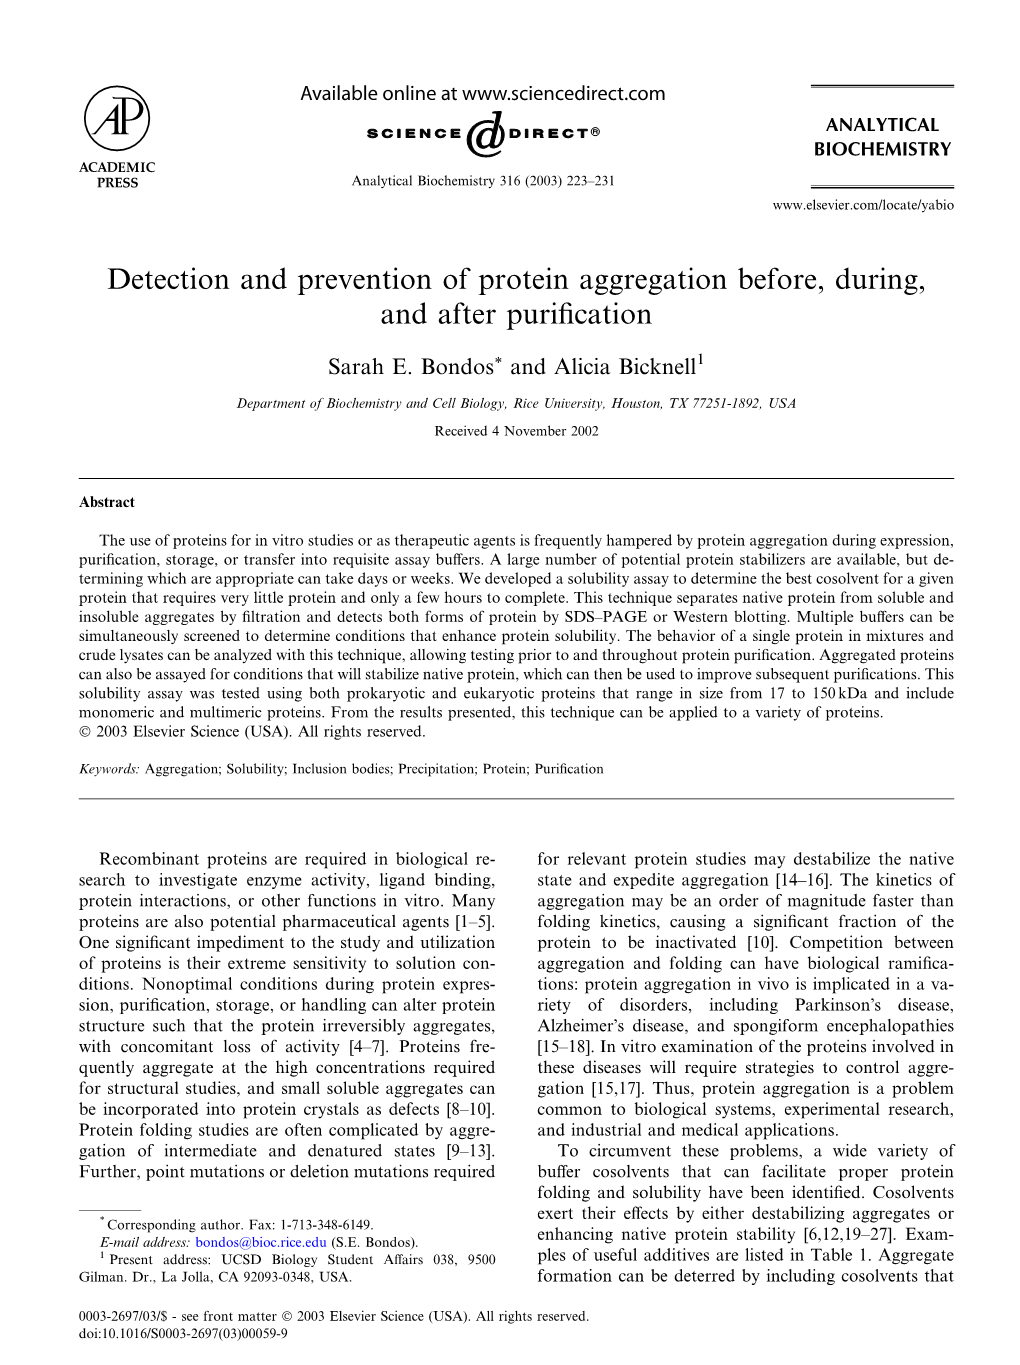 Detection and Prevention of Protein Aggregation Before, During, and After Puriﬁcation